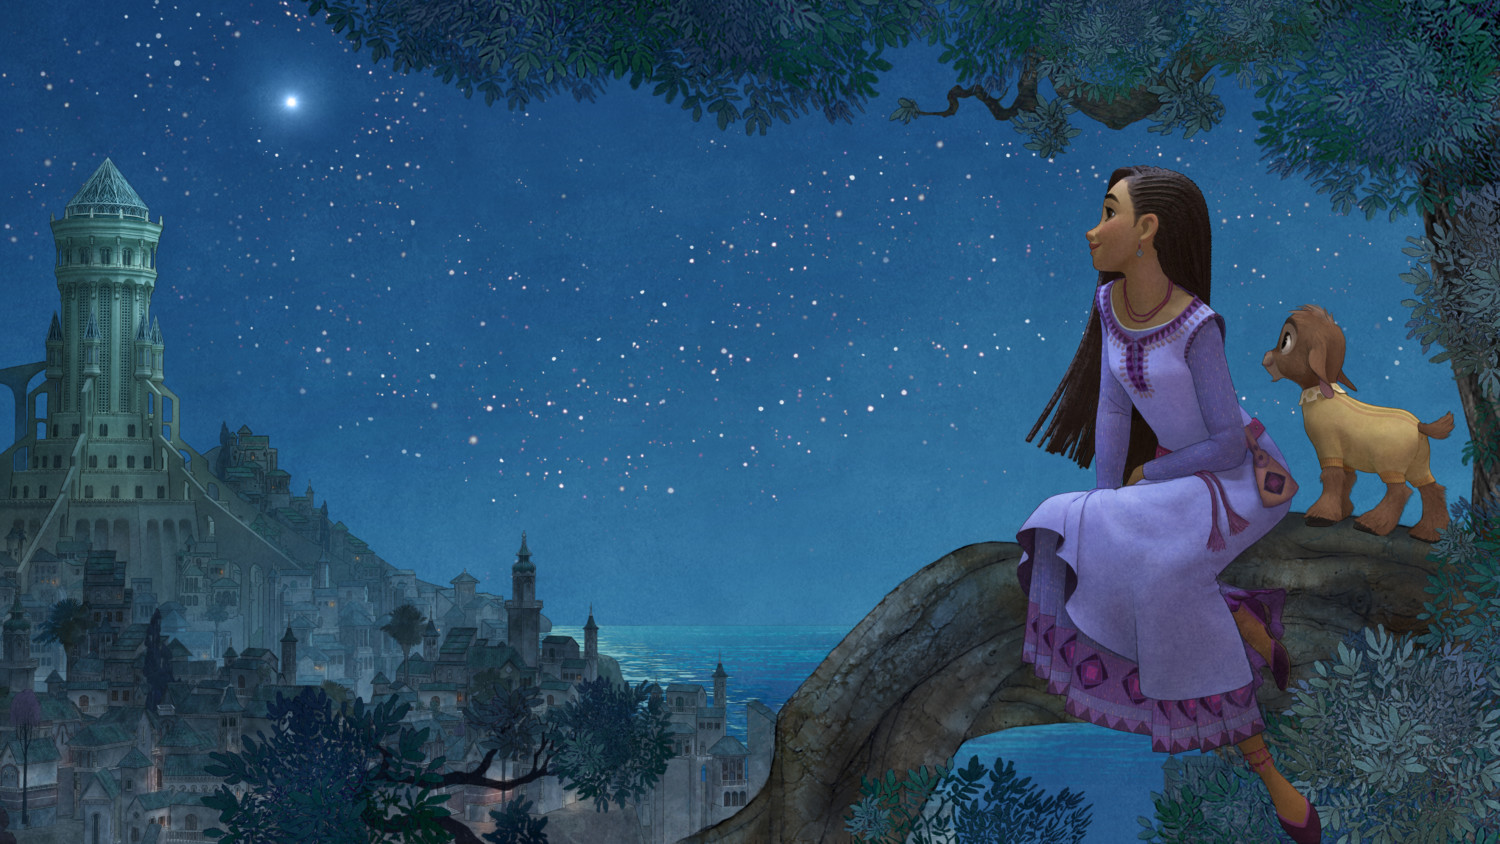 Disney's 'Wish': What We Know About The New Movie - Simplemost